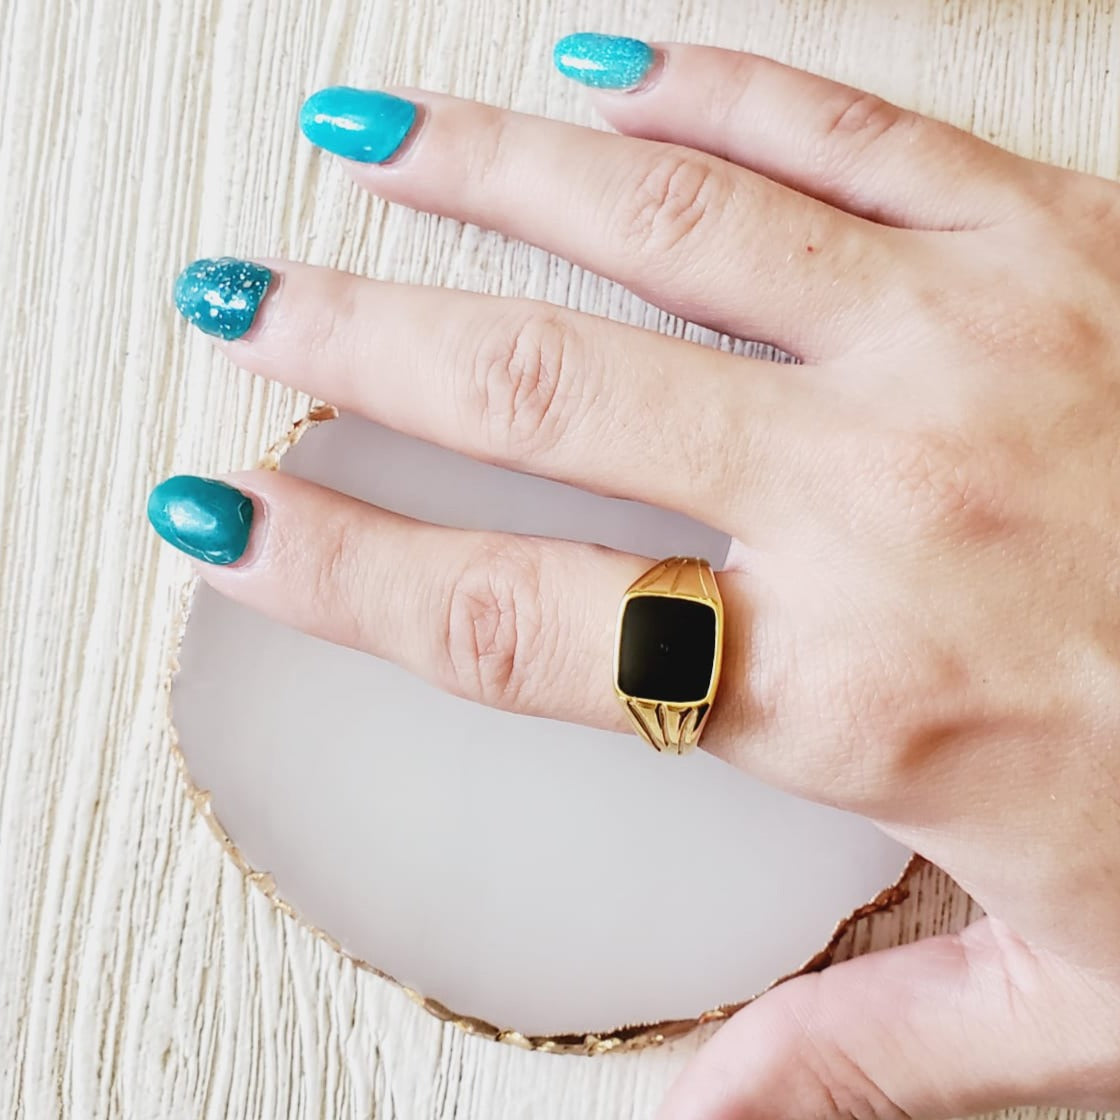 black ring, 18k gold plated ring, water resistant ring, sweat resistant ring, vintage gold ring, vintage ring, bold ring, chunky ring, dainty ring, gold filled ring, dainty jewelry, hey harper jewelry, the views and co jewelry, ellie vail jewelry, she is gold jewelry, aurora jewelry shop, kinita jewelry, babeina jewelry